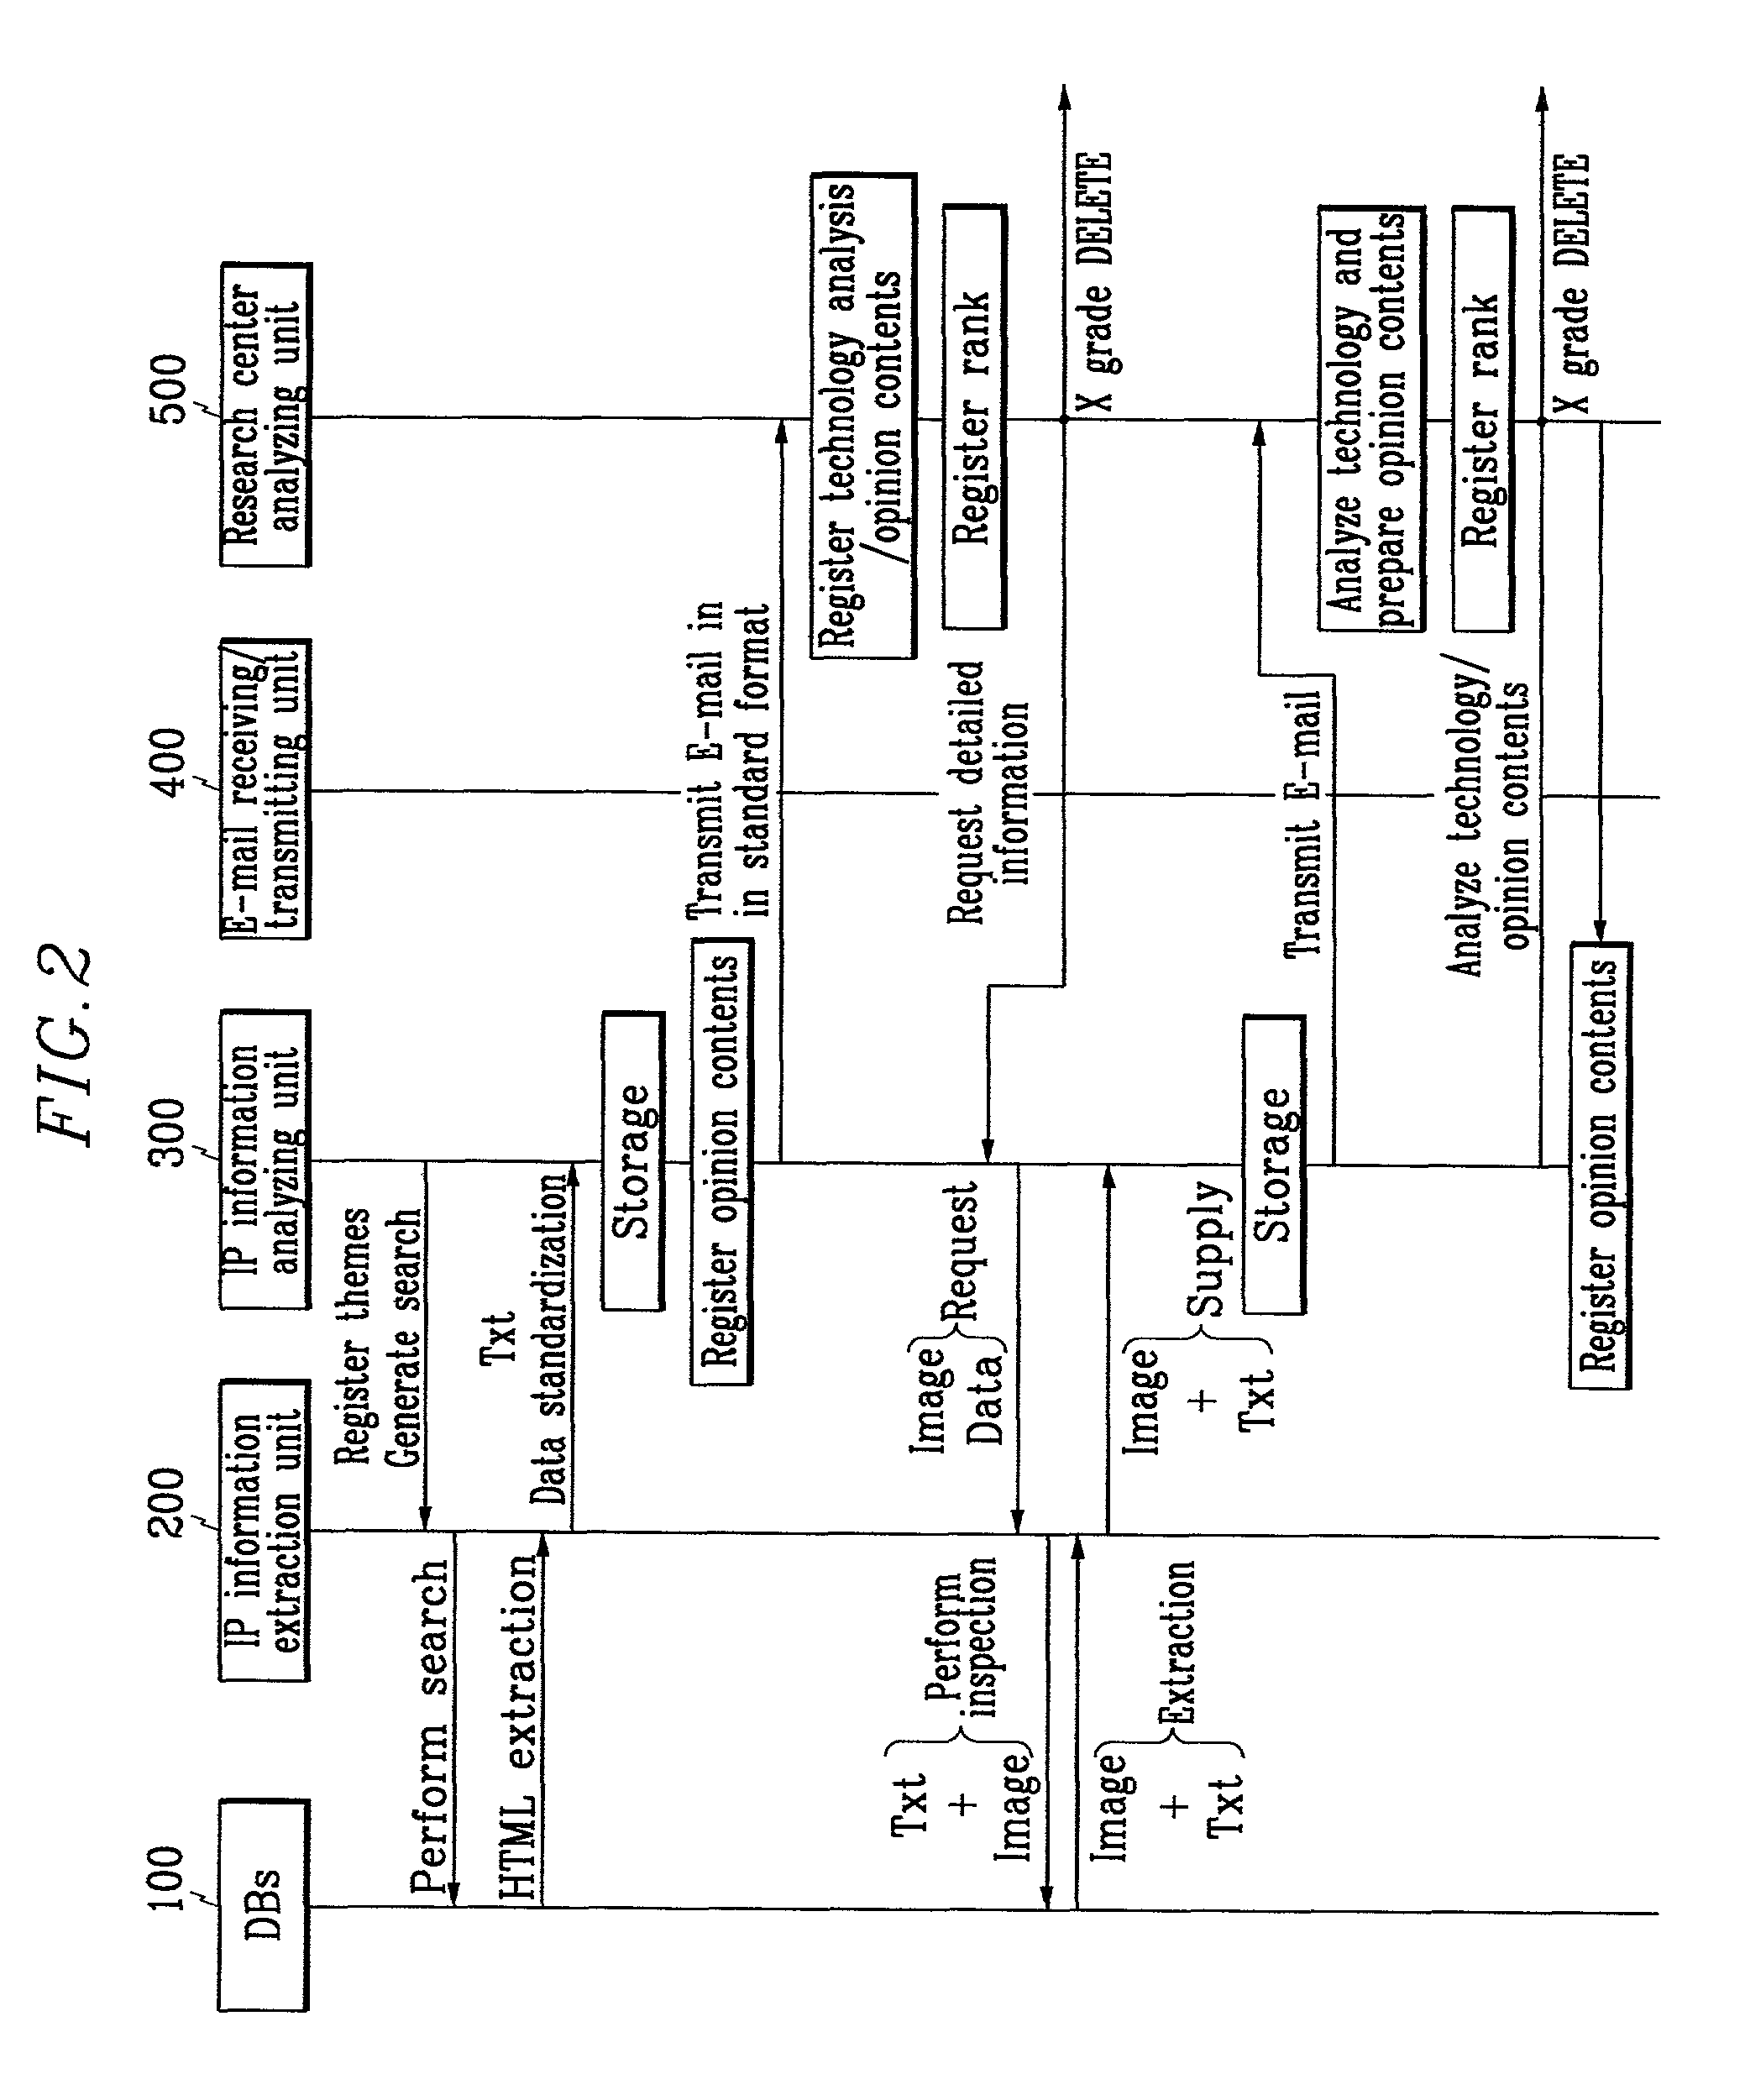 System and method for analyzing and utilizing intellectual property information